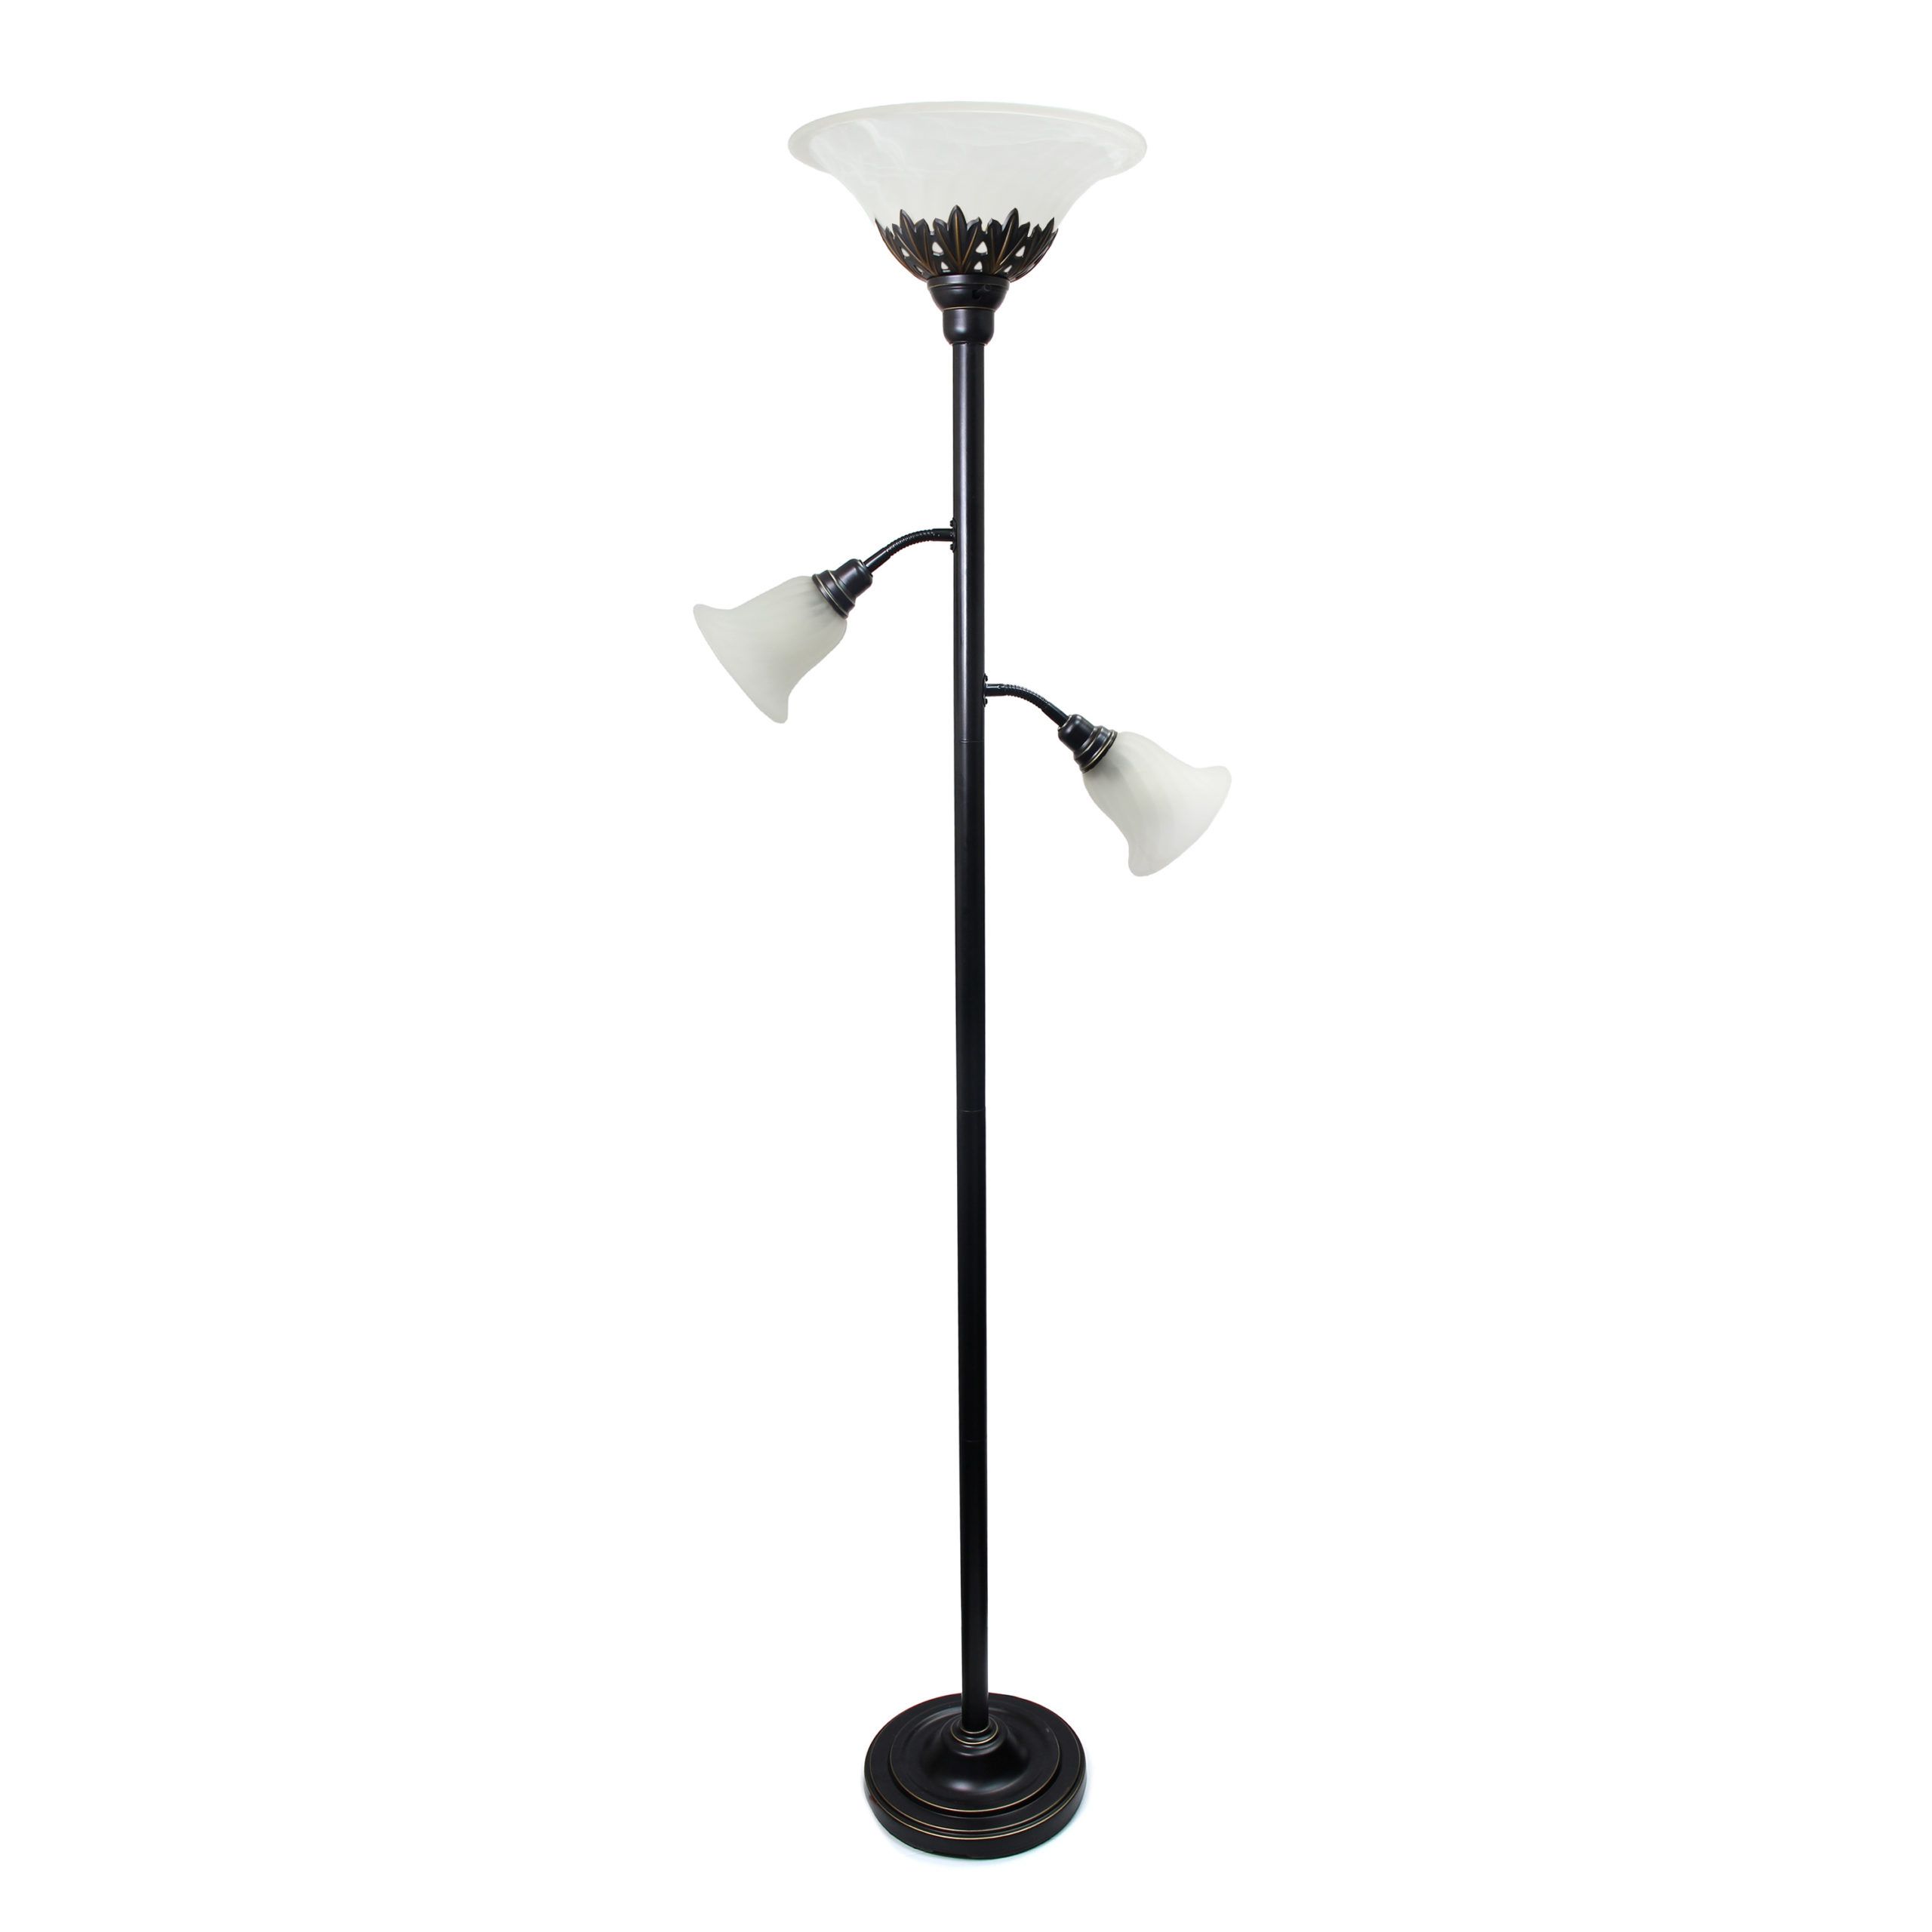 Elegant Designs 3 Light Floor Lamp With White Scalloped Glass Shades,  Restoration Bronze And White | All The Rages In 3 Light Floor Lamps (View 7 of 15)